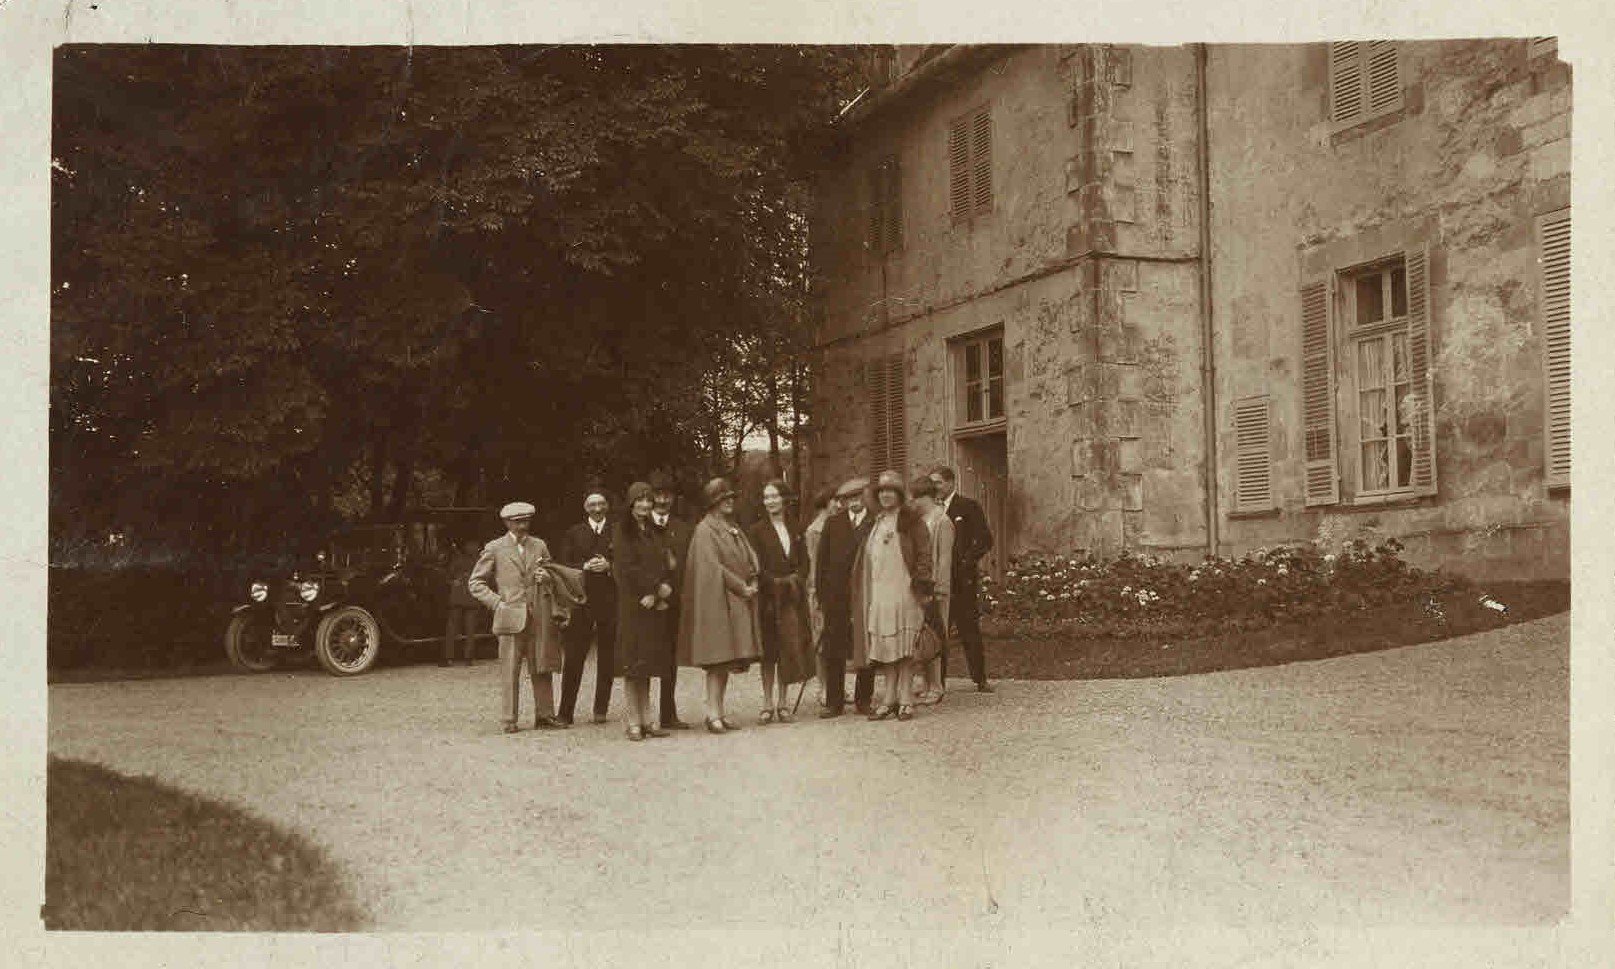 Photograph of Sir Francis and Eileen Younghusband with the Magnac family, 23 September 1928